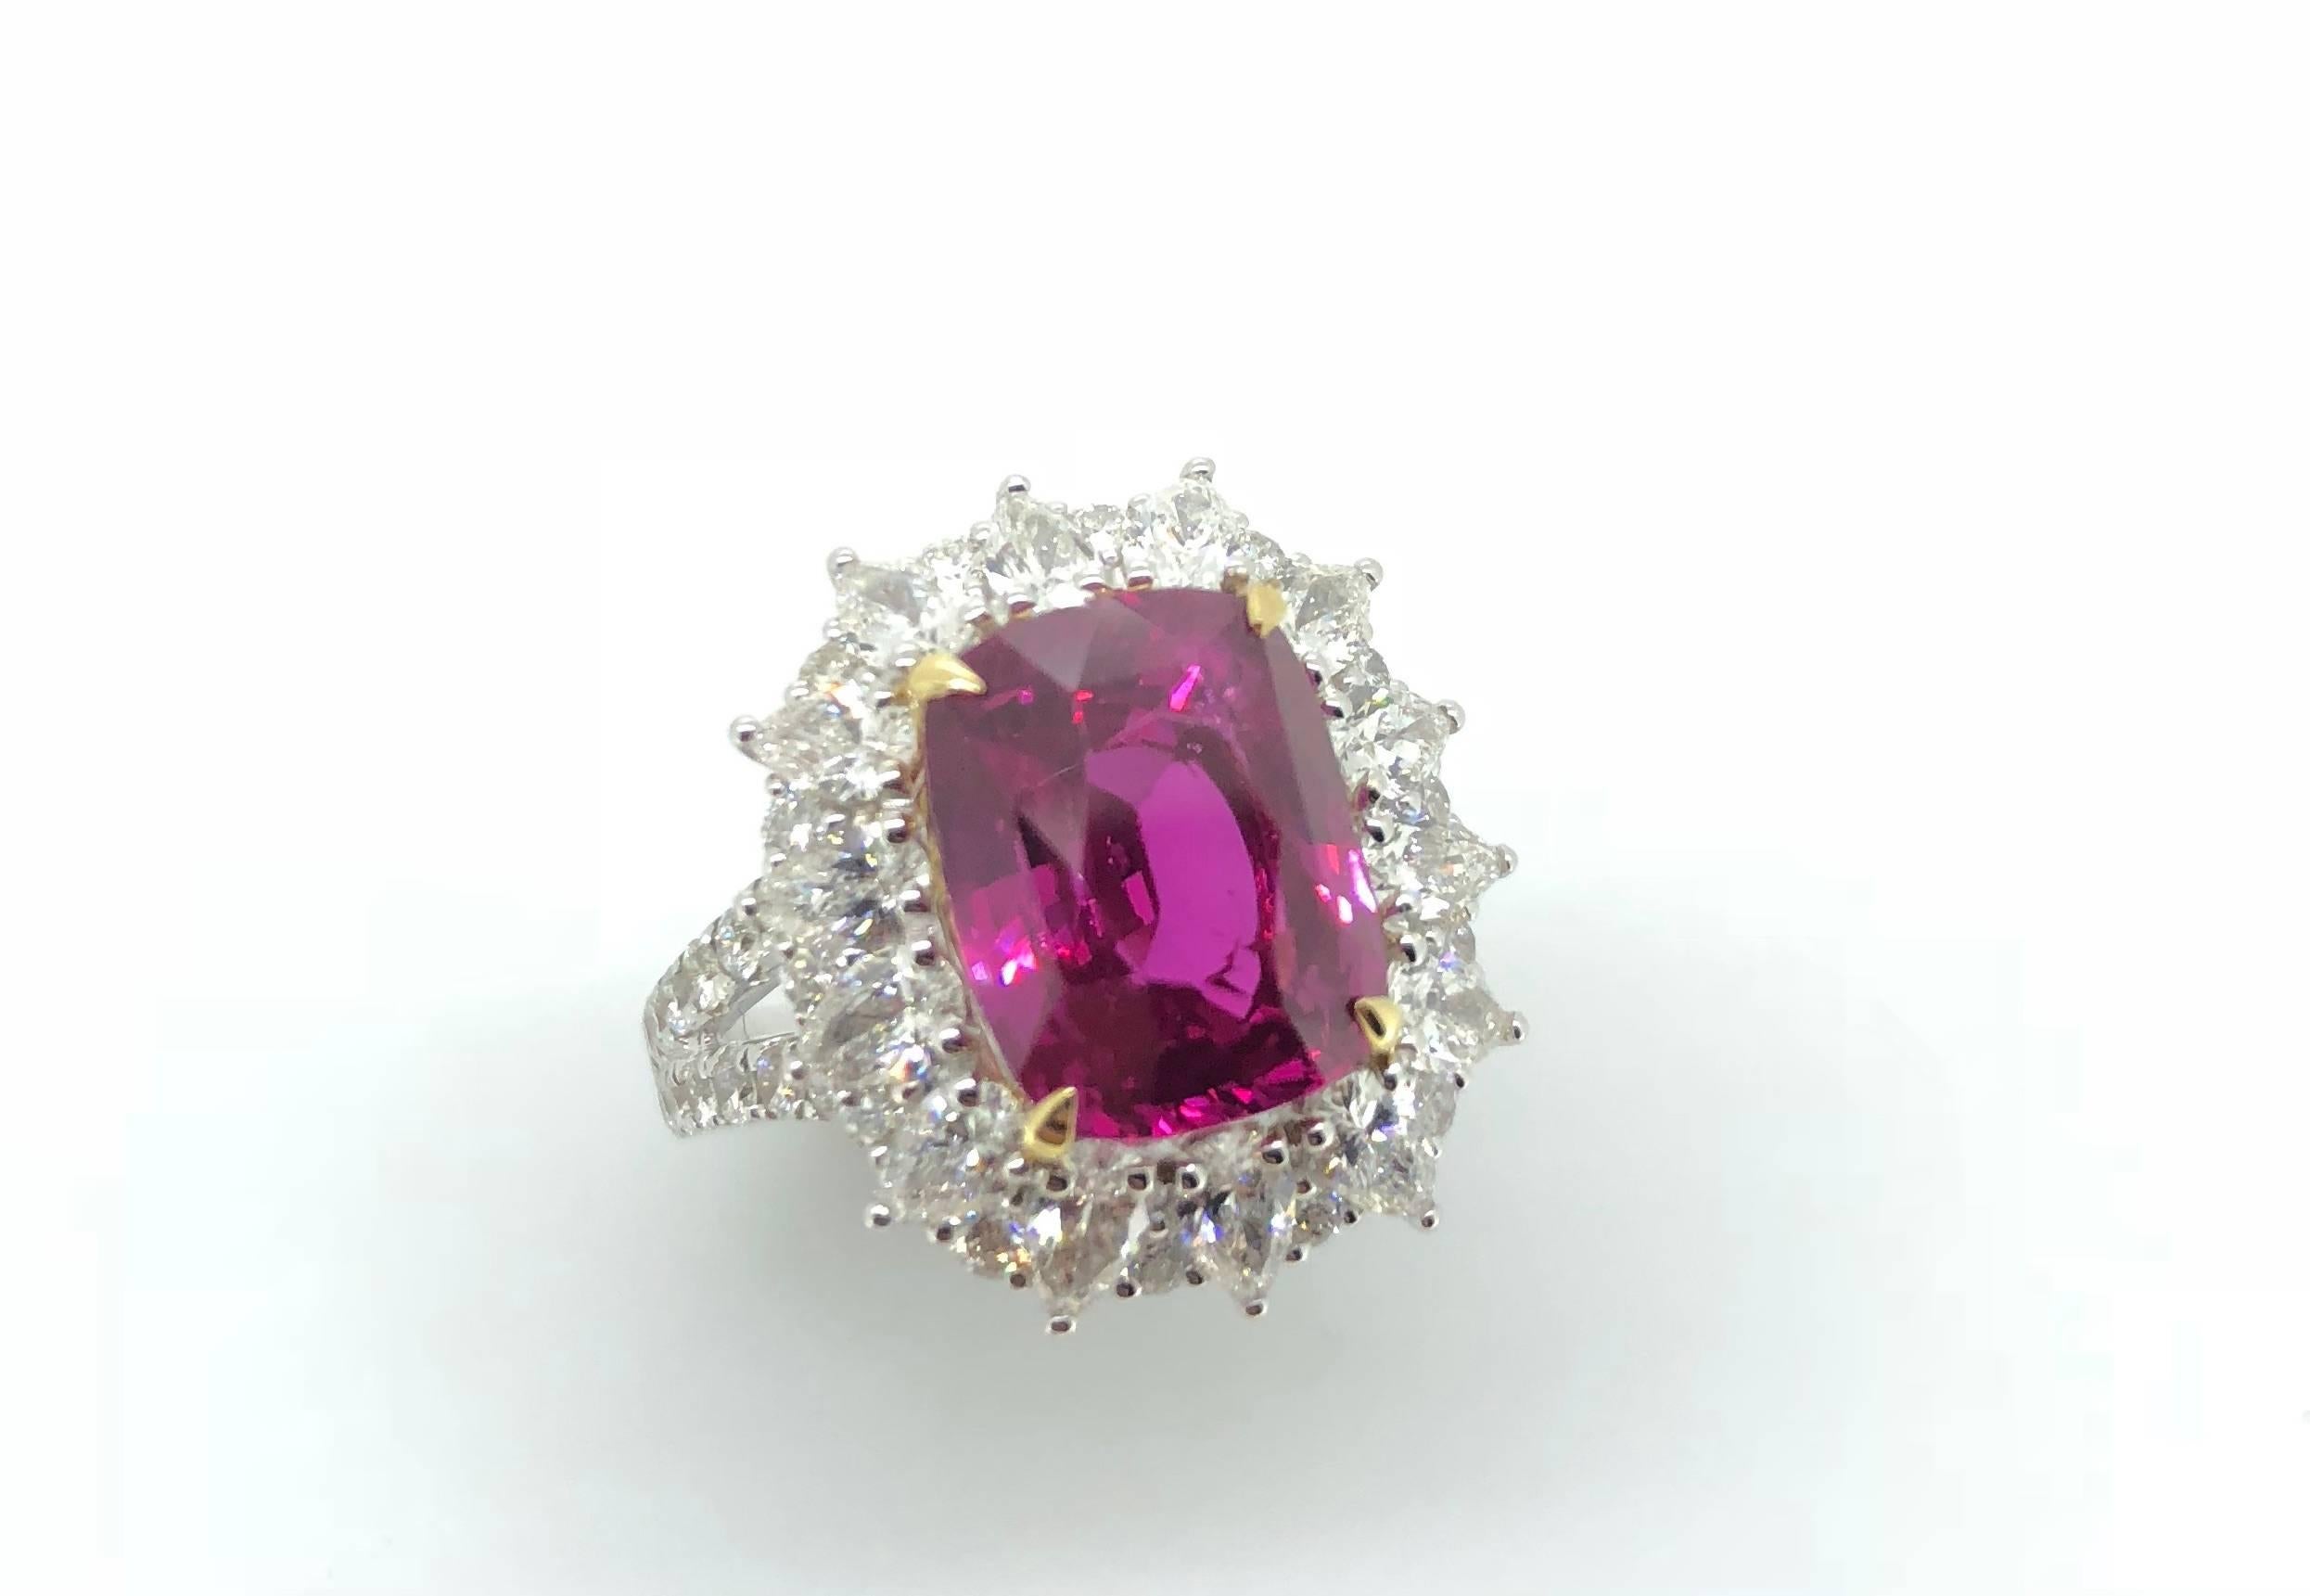 A 7.00 Carat Cushion cut Vivid Pink Sapphire (Heat) Cocktail Cluster Diamond Ring. 

Mounted in 18K White and Yellow gold with cluster of pear shape diamonds interspaced by round brilliant cut diamonds. The ring is ornately completed with a diamond